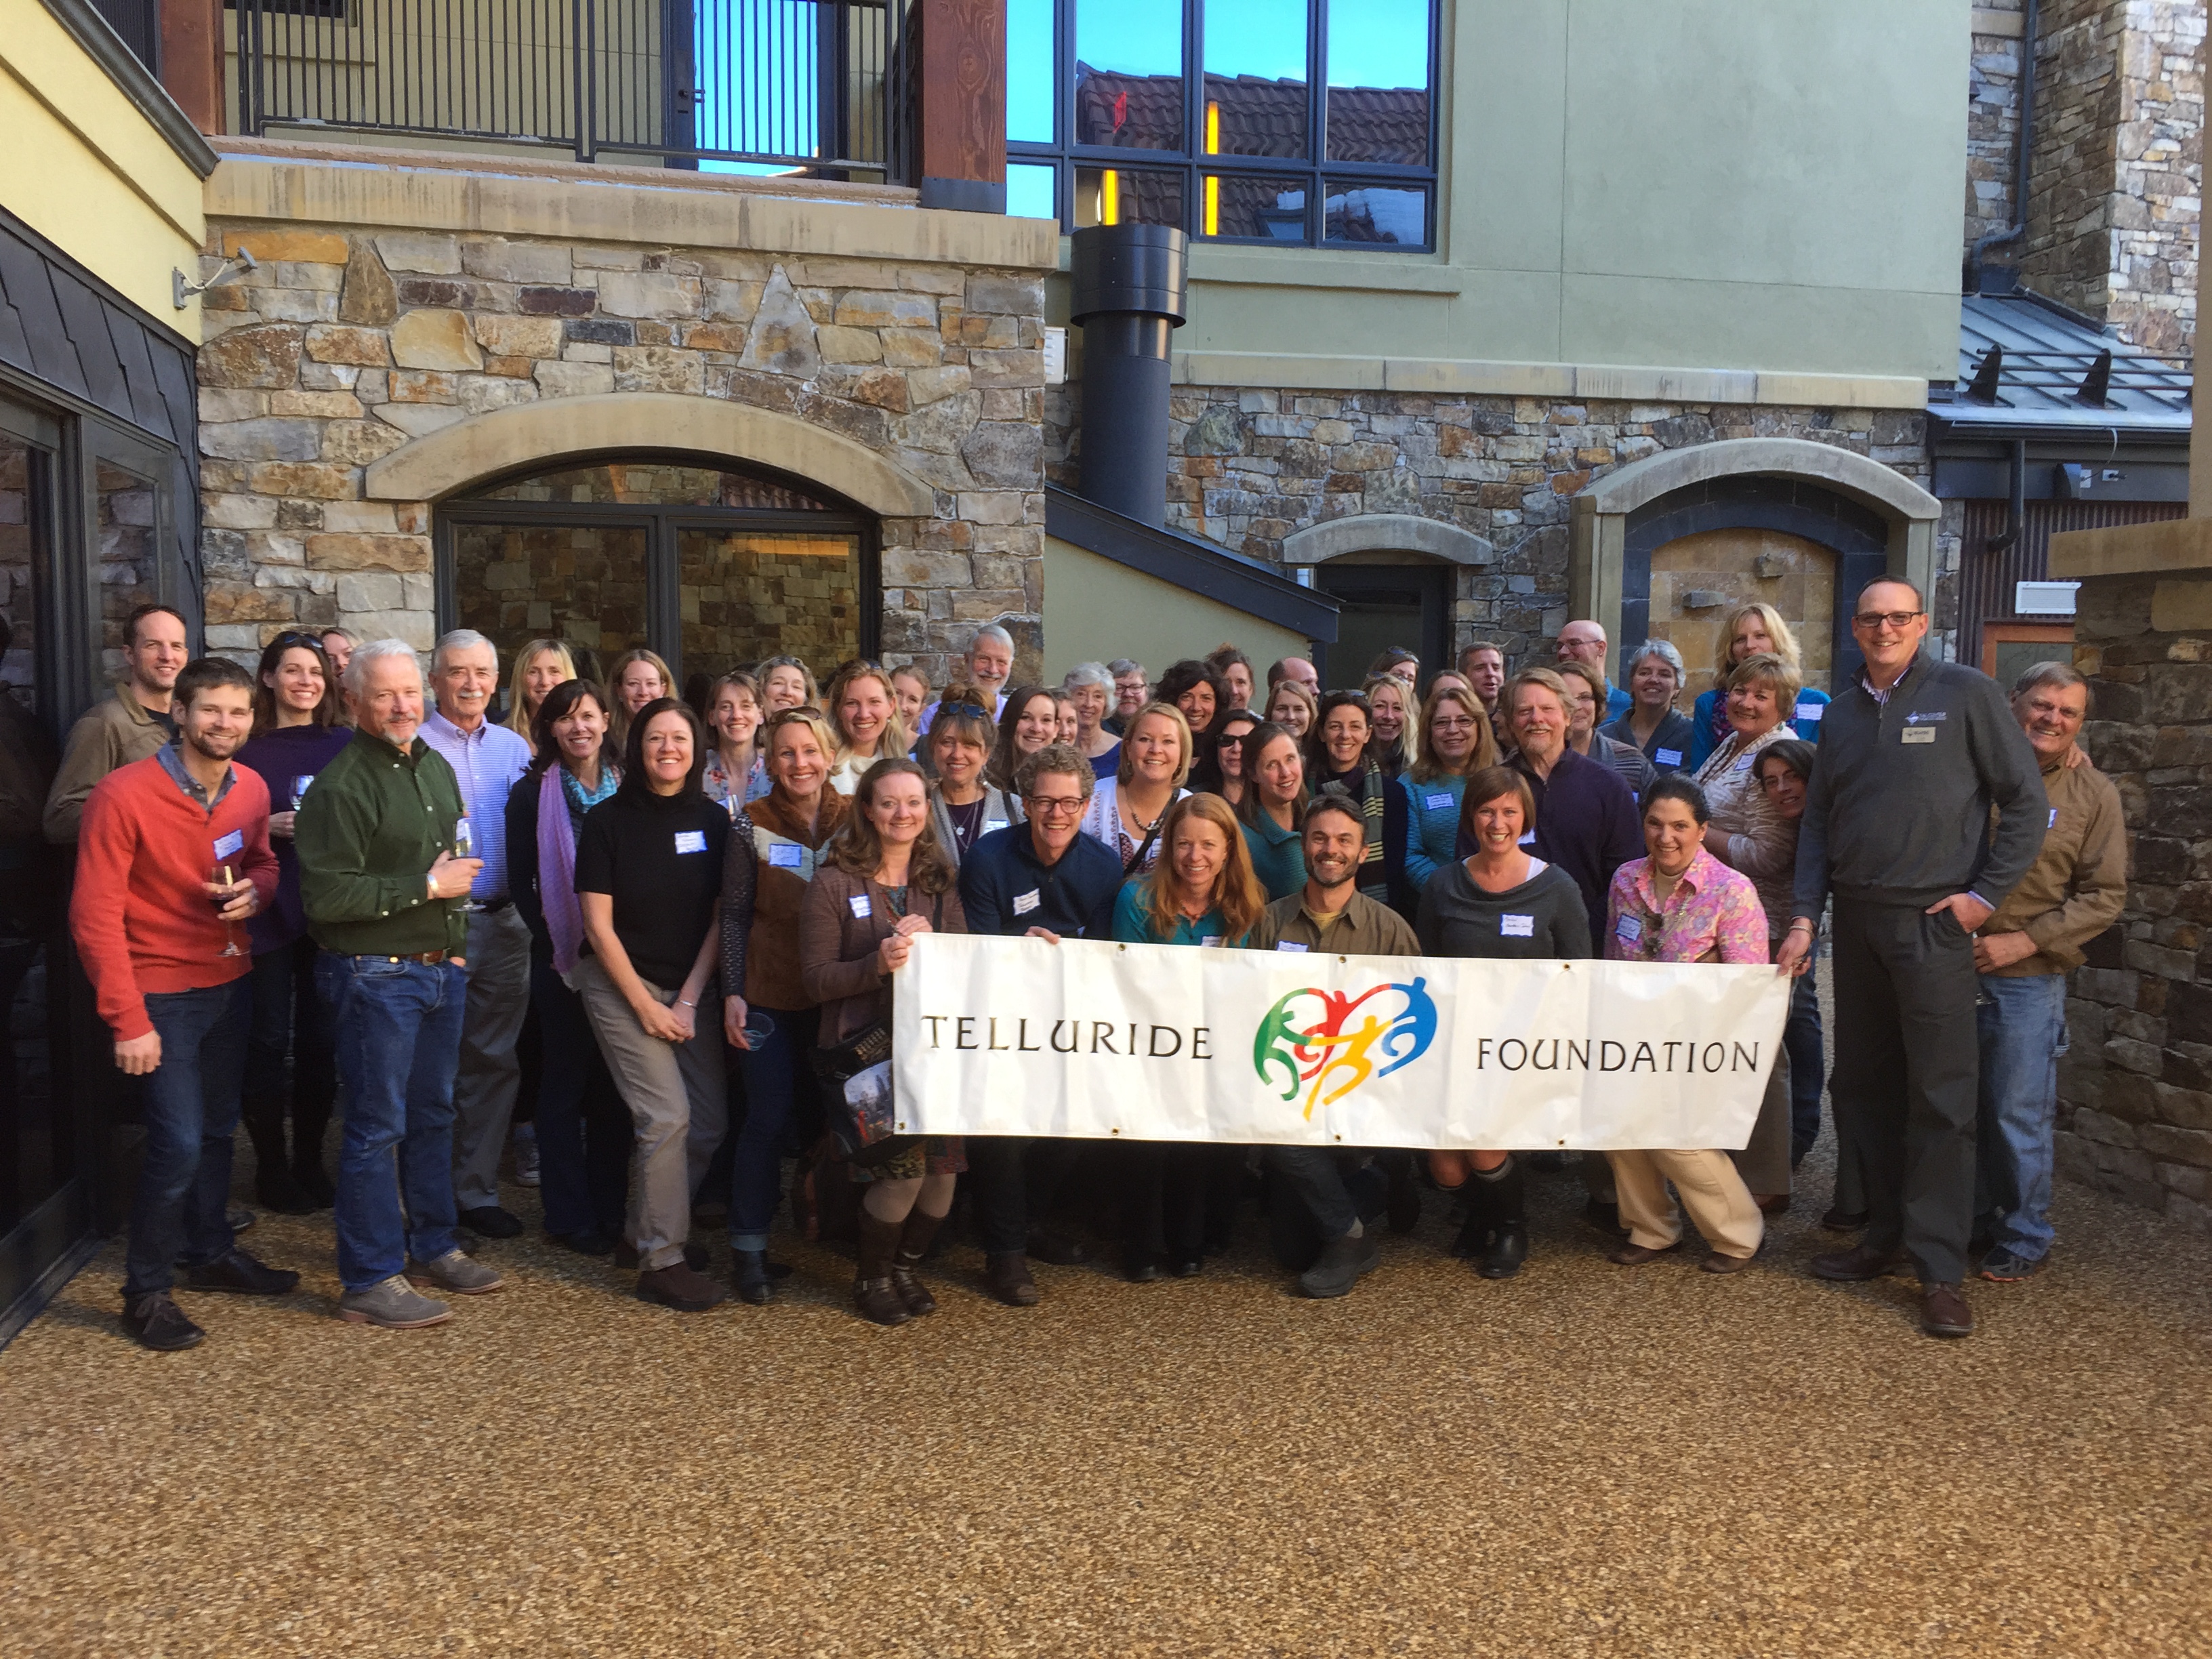 Group holding Telluride Foundation sign